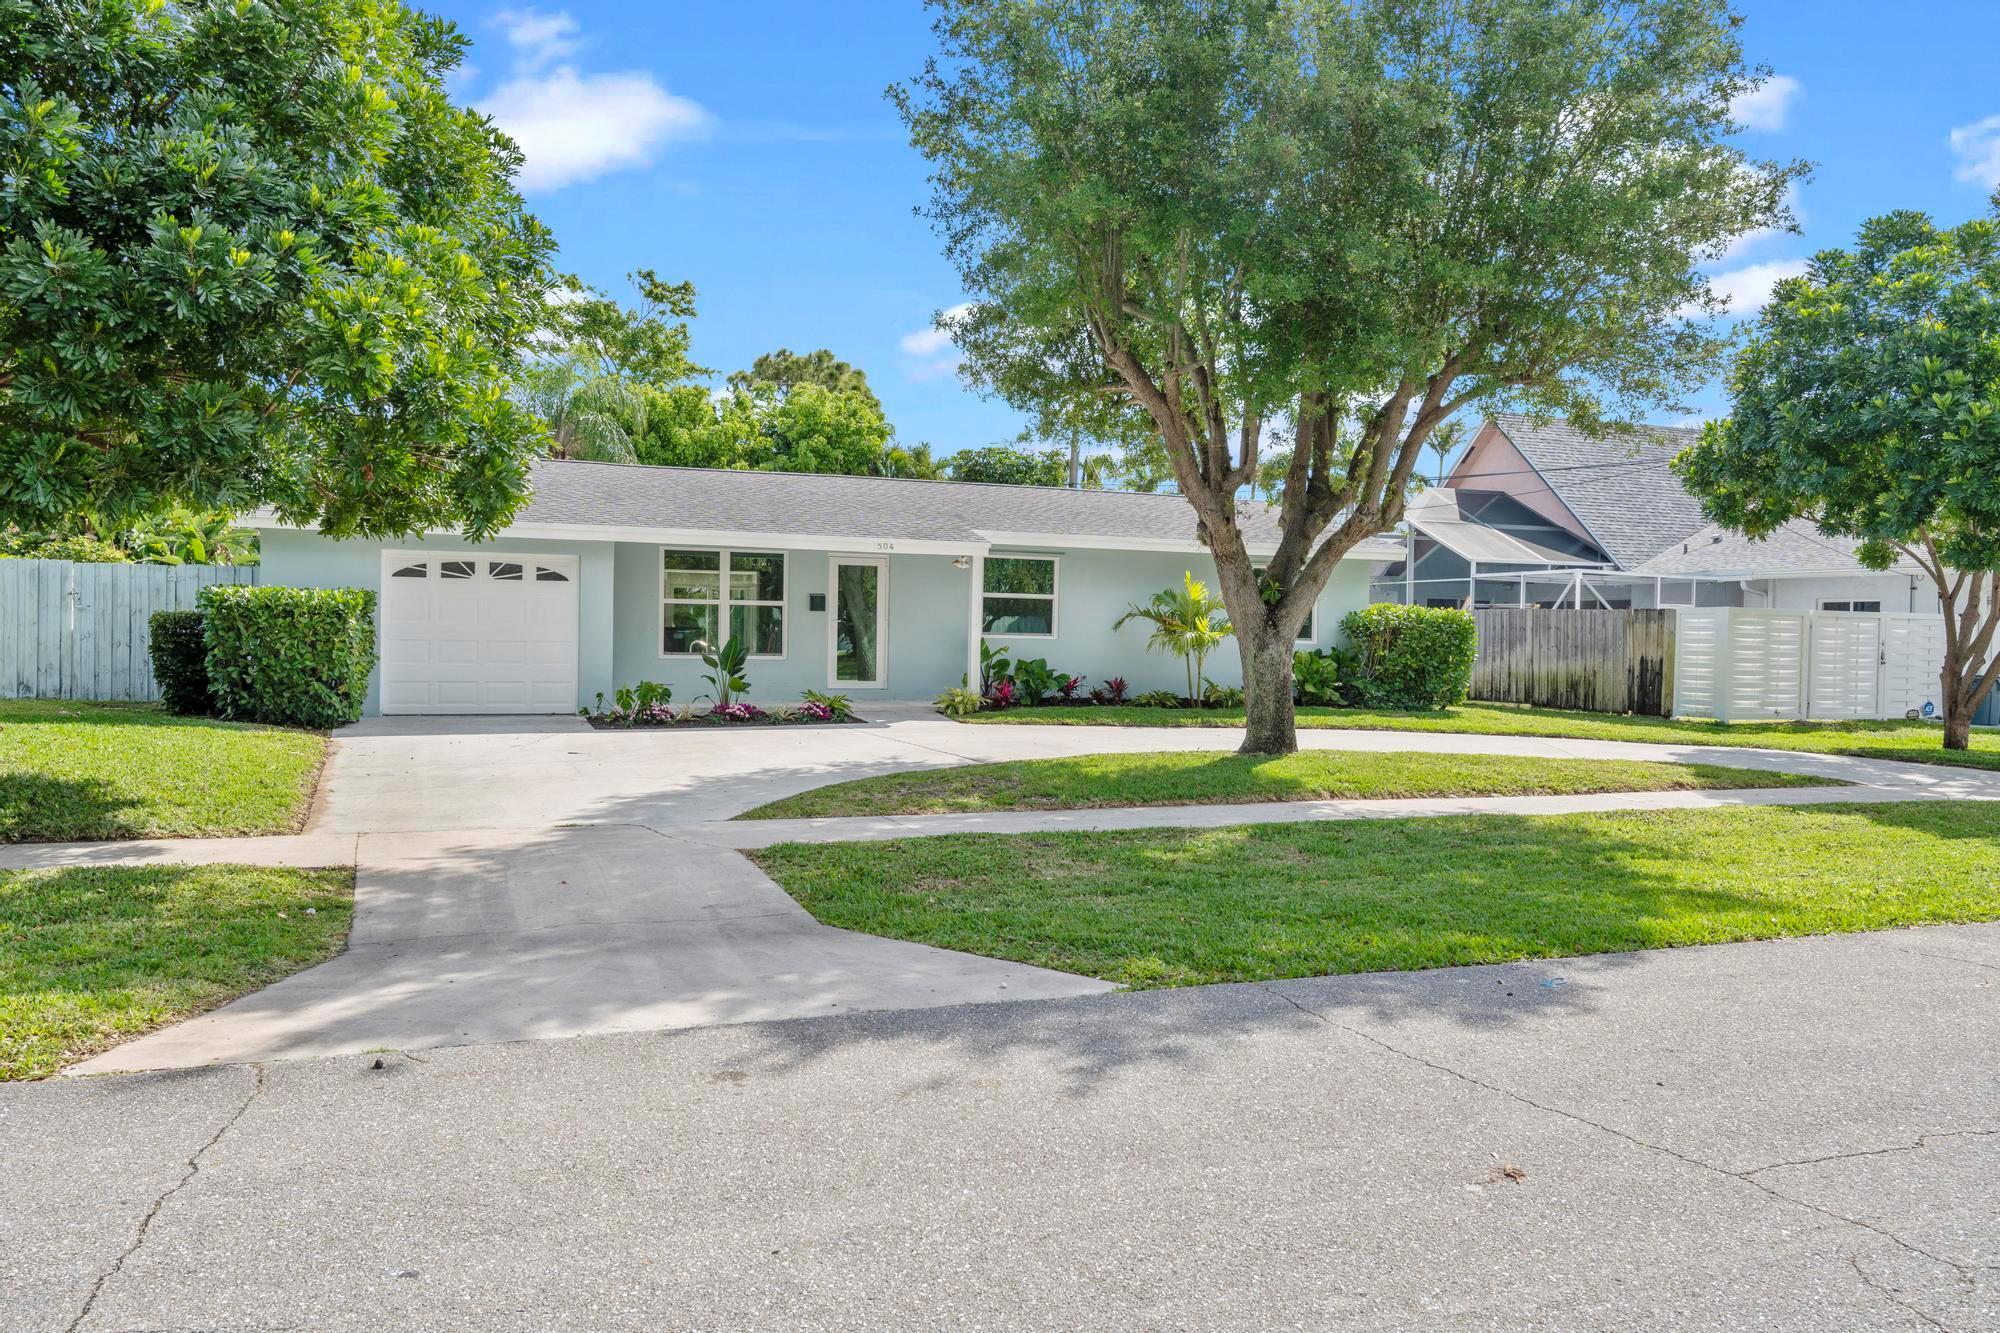 Renovated to Perfection! This North Palm Beach home features a new kitchen with a custom hood, hurricane windows (2024), and LPV flooring. Enjoy the resurfaced pool deck and covered porch for outdoor entertaining. Ideal location near beaches, dining, and top schools.